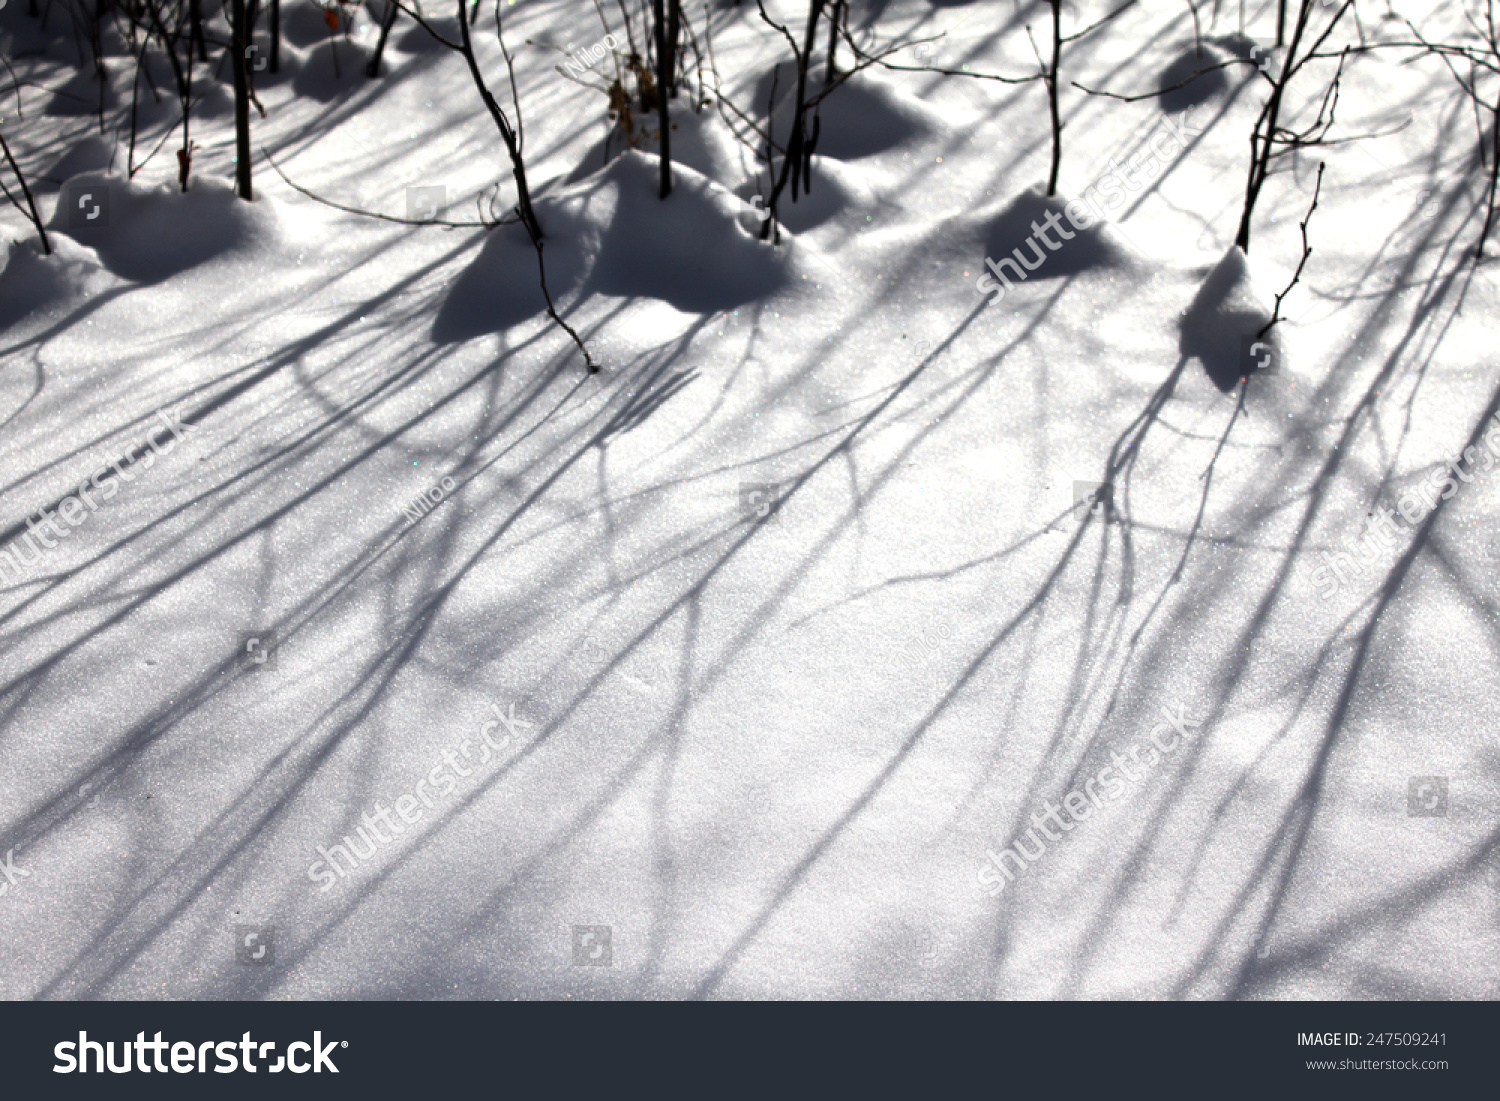 Shadows Of Branches On Snow Stock Photo 247509241 : Shutterstock